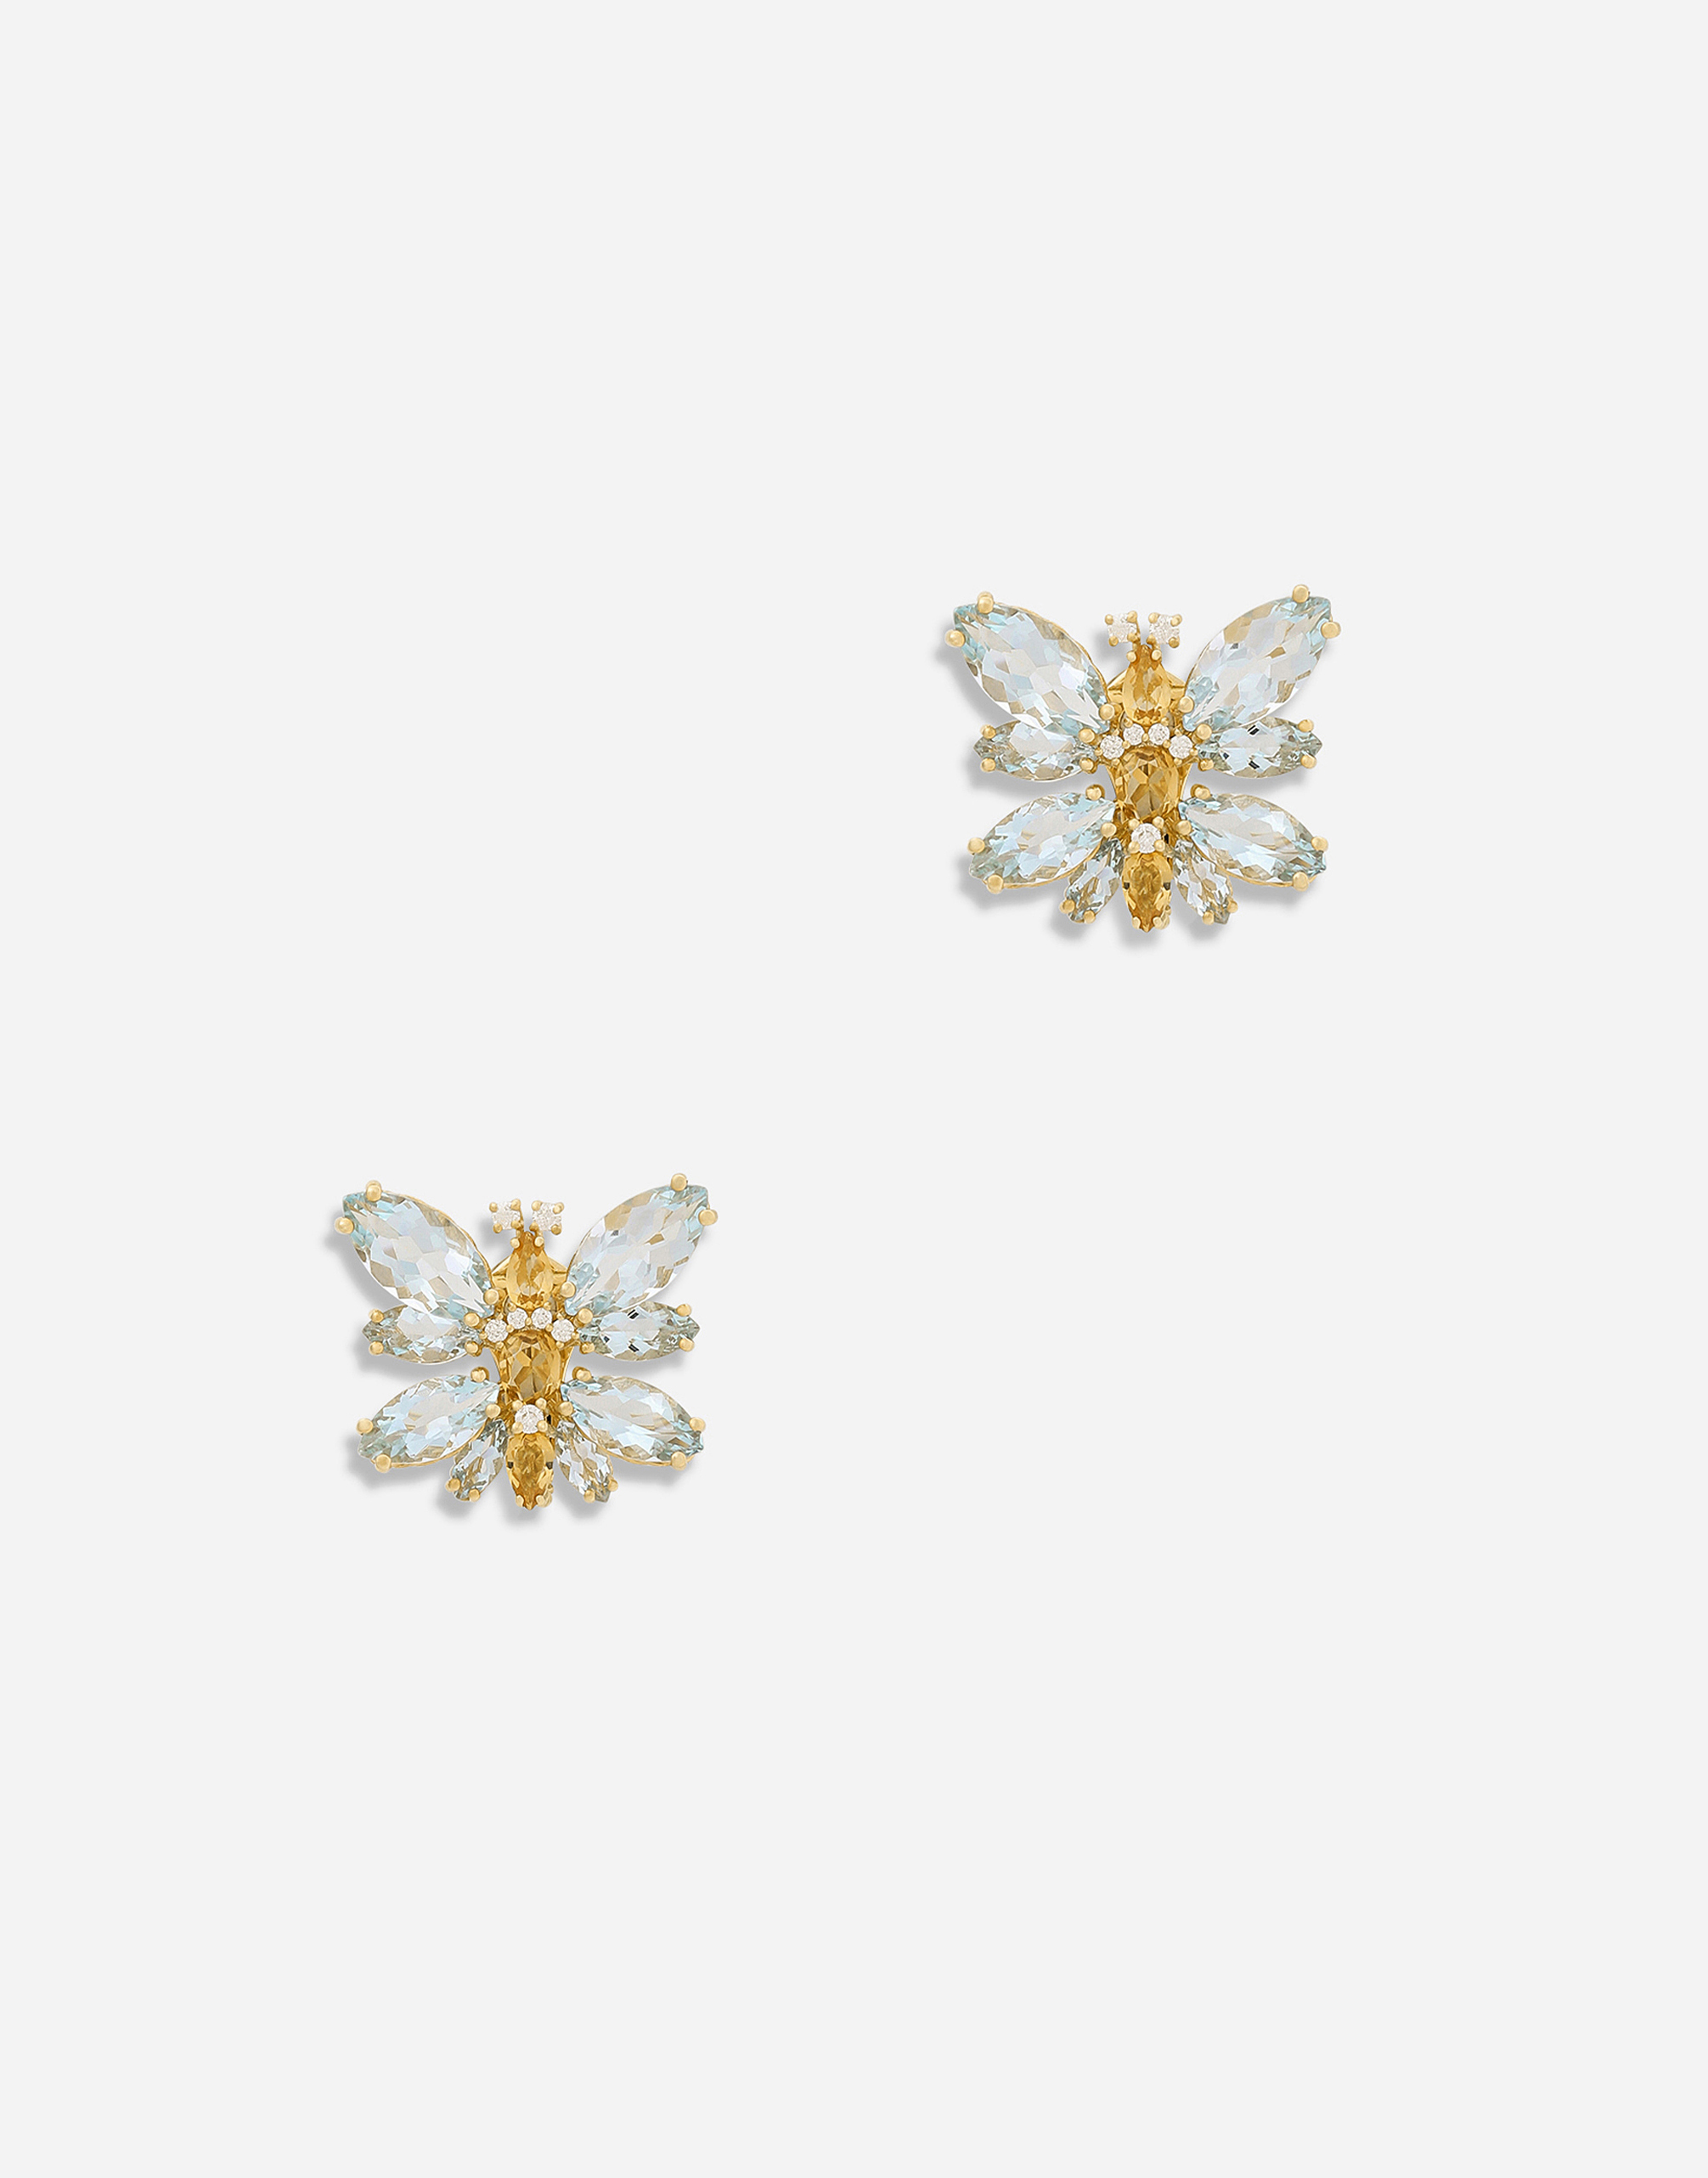 Spring earrings in yellow 18kt gold with aquamarine butterfly in Gold